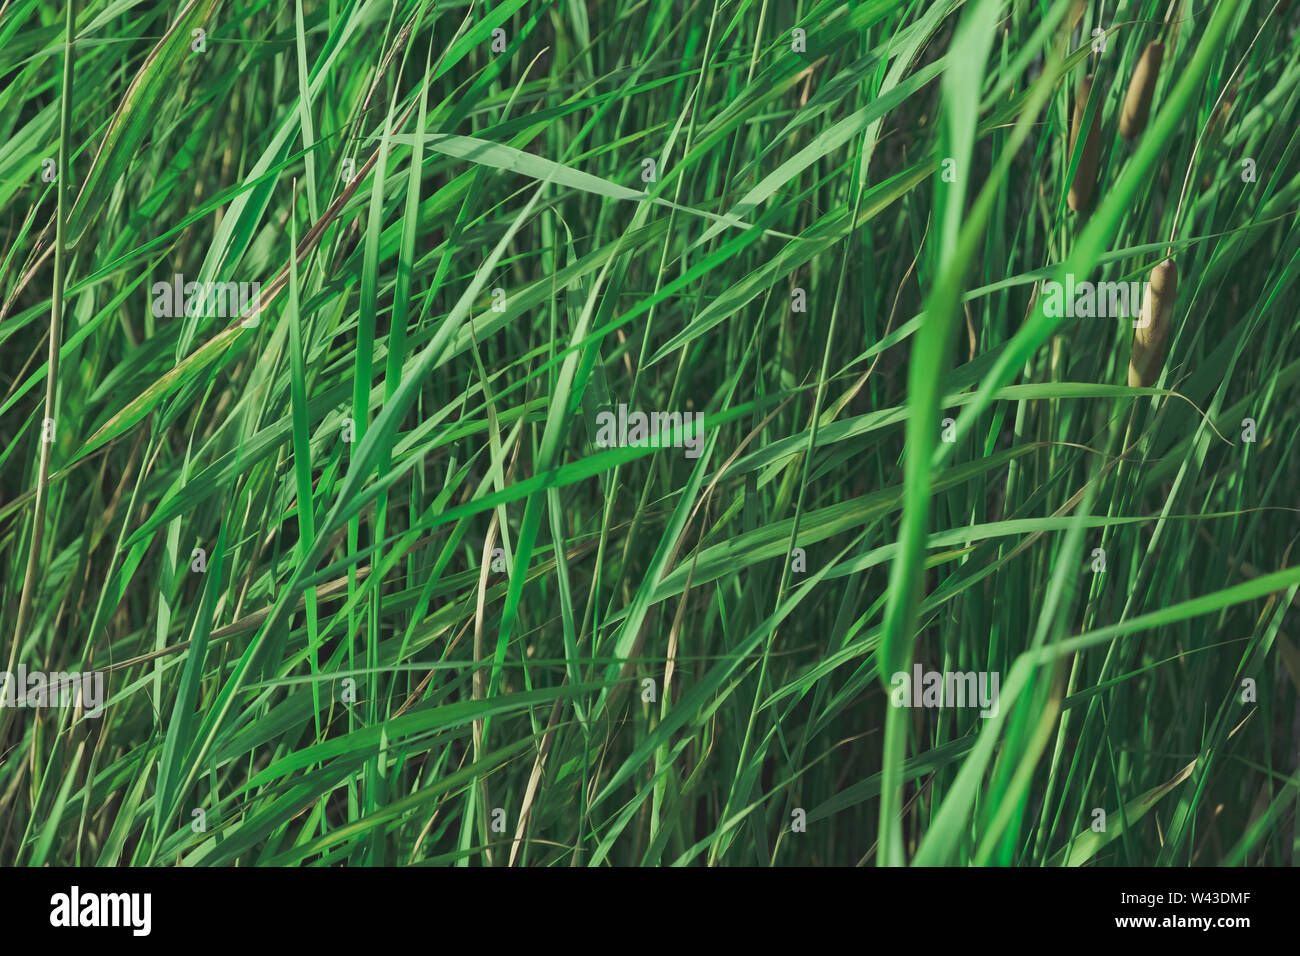 Balrush plants in faded green colors. Calming nature details: sunlit lake cane, single-tone background image Stock Photo